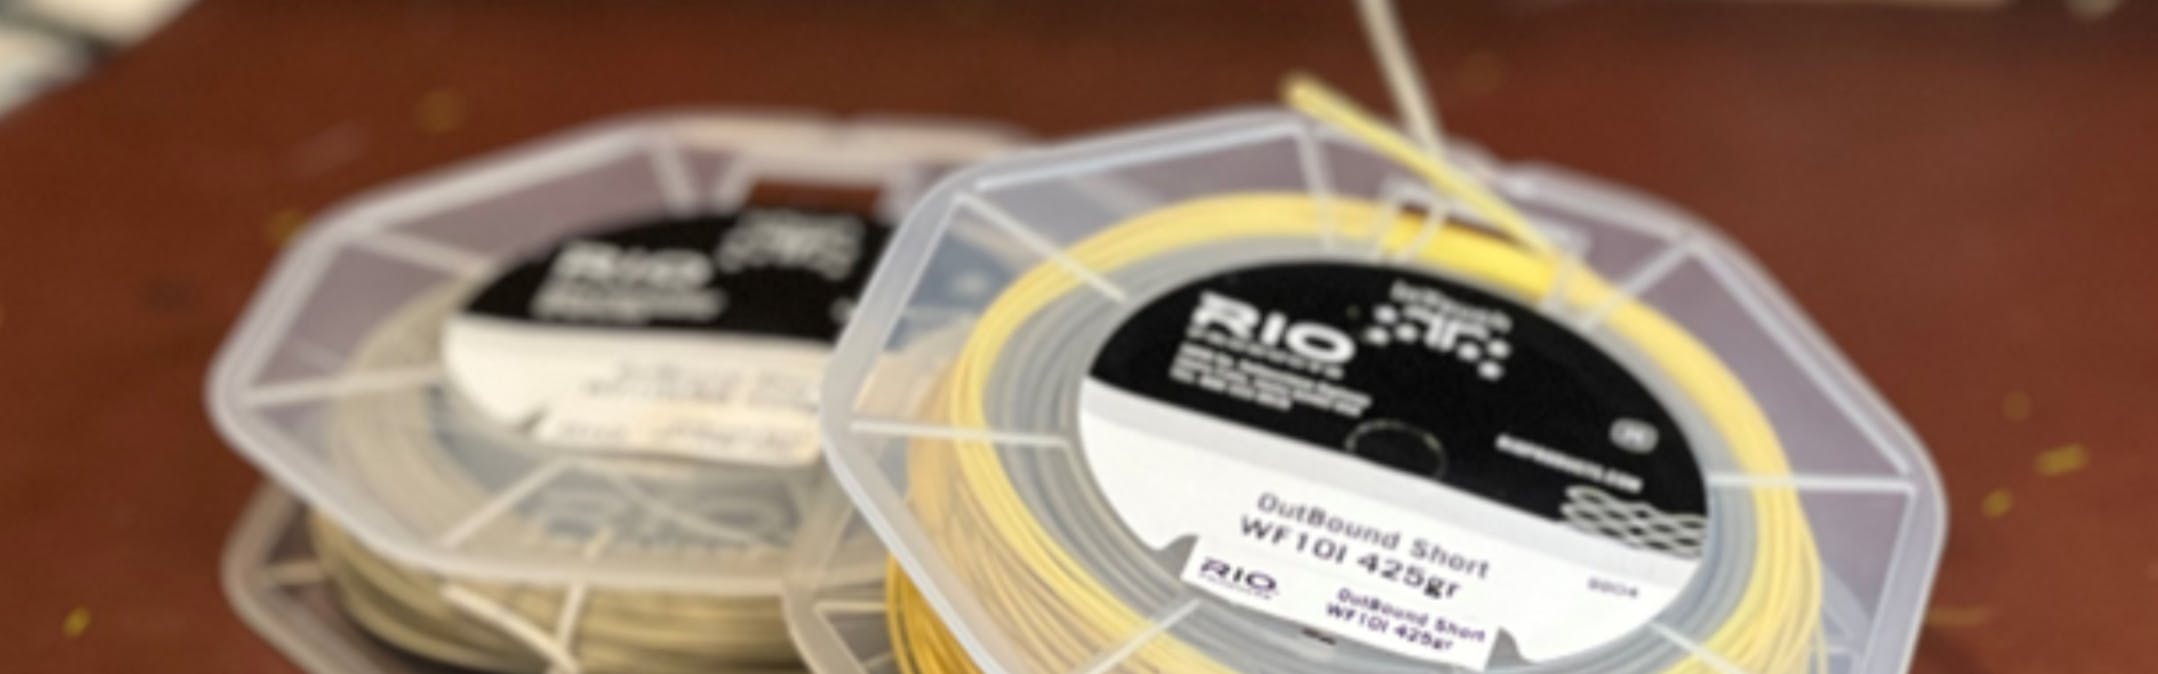 Expert Review: Rio InTouch Outbound Short Fishing Line